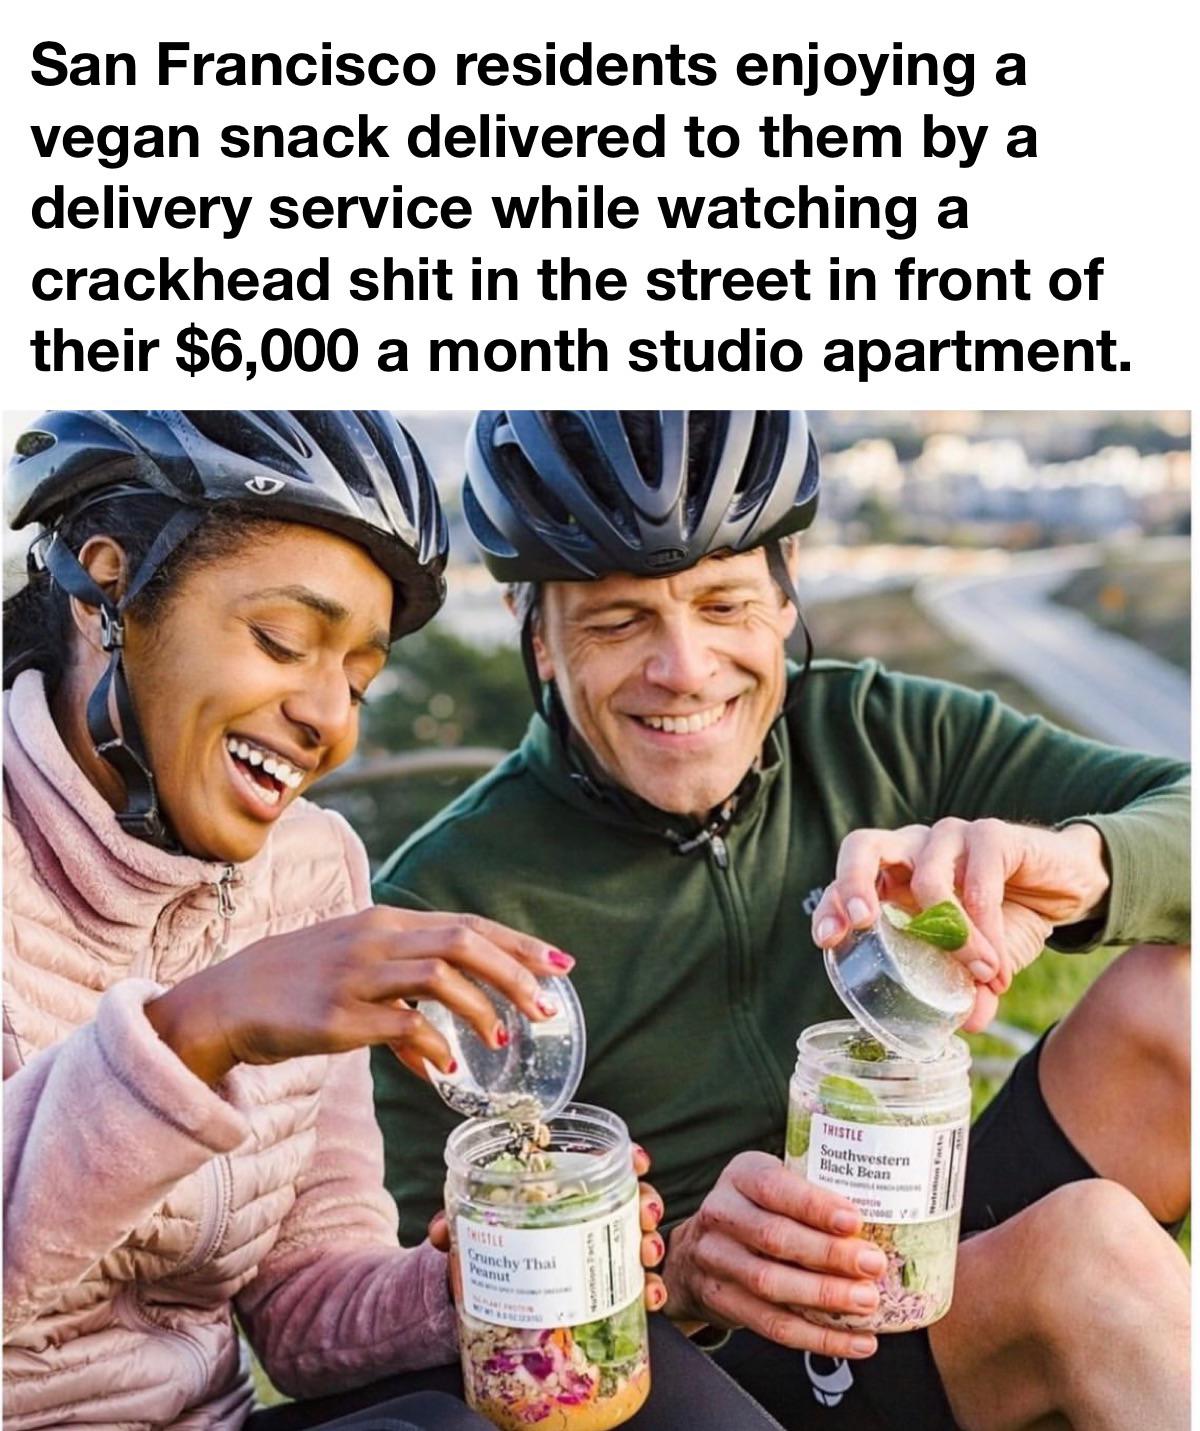 funny memes - human behavior - San Francisco residents enjoying a vegan snack delivered to them by a delivery service while watching a crackhead shit in the street in front of their $6,000 a month studio apartment. Thistle Southwestern Black Bean Crunchy 